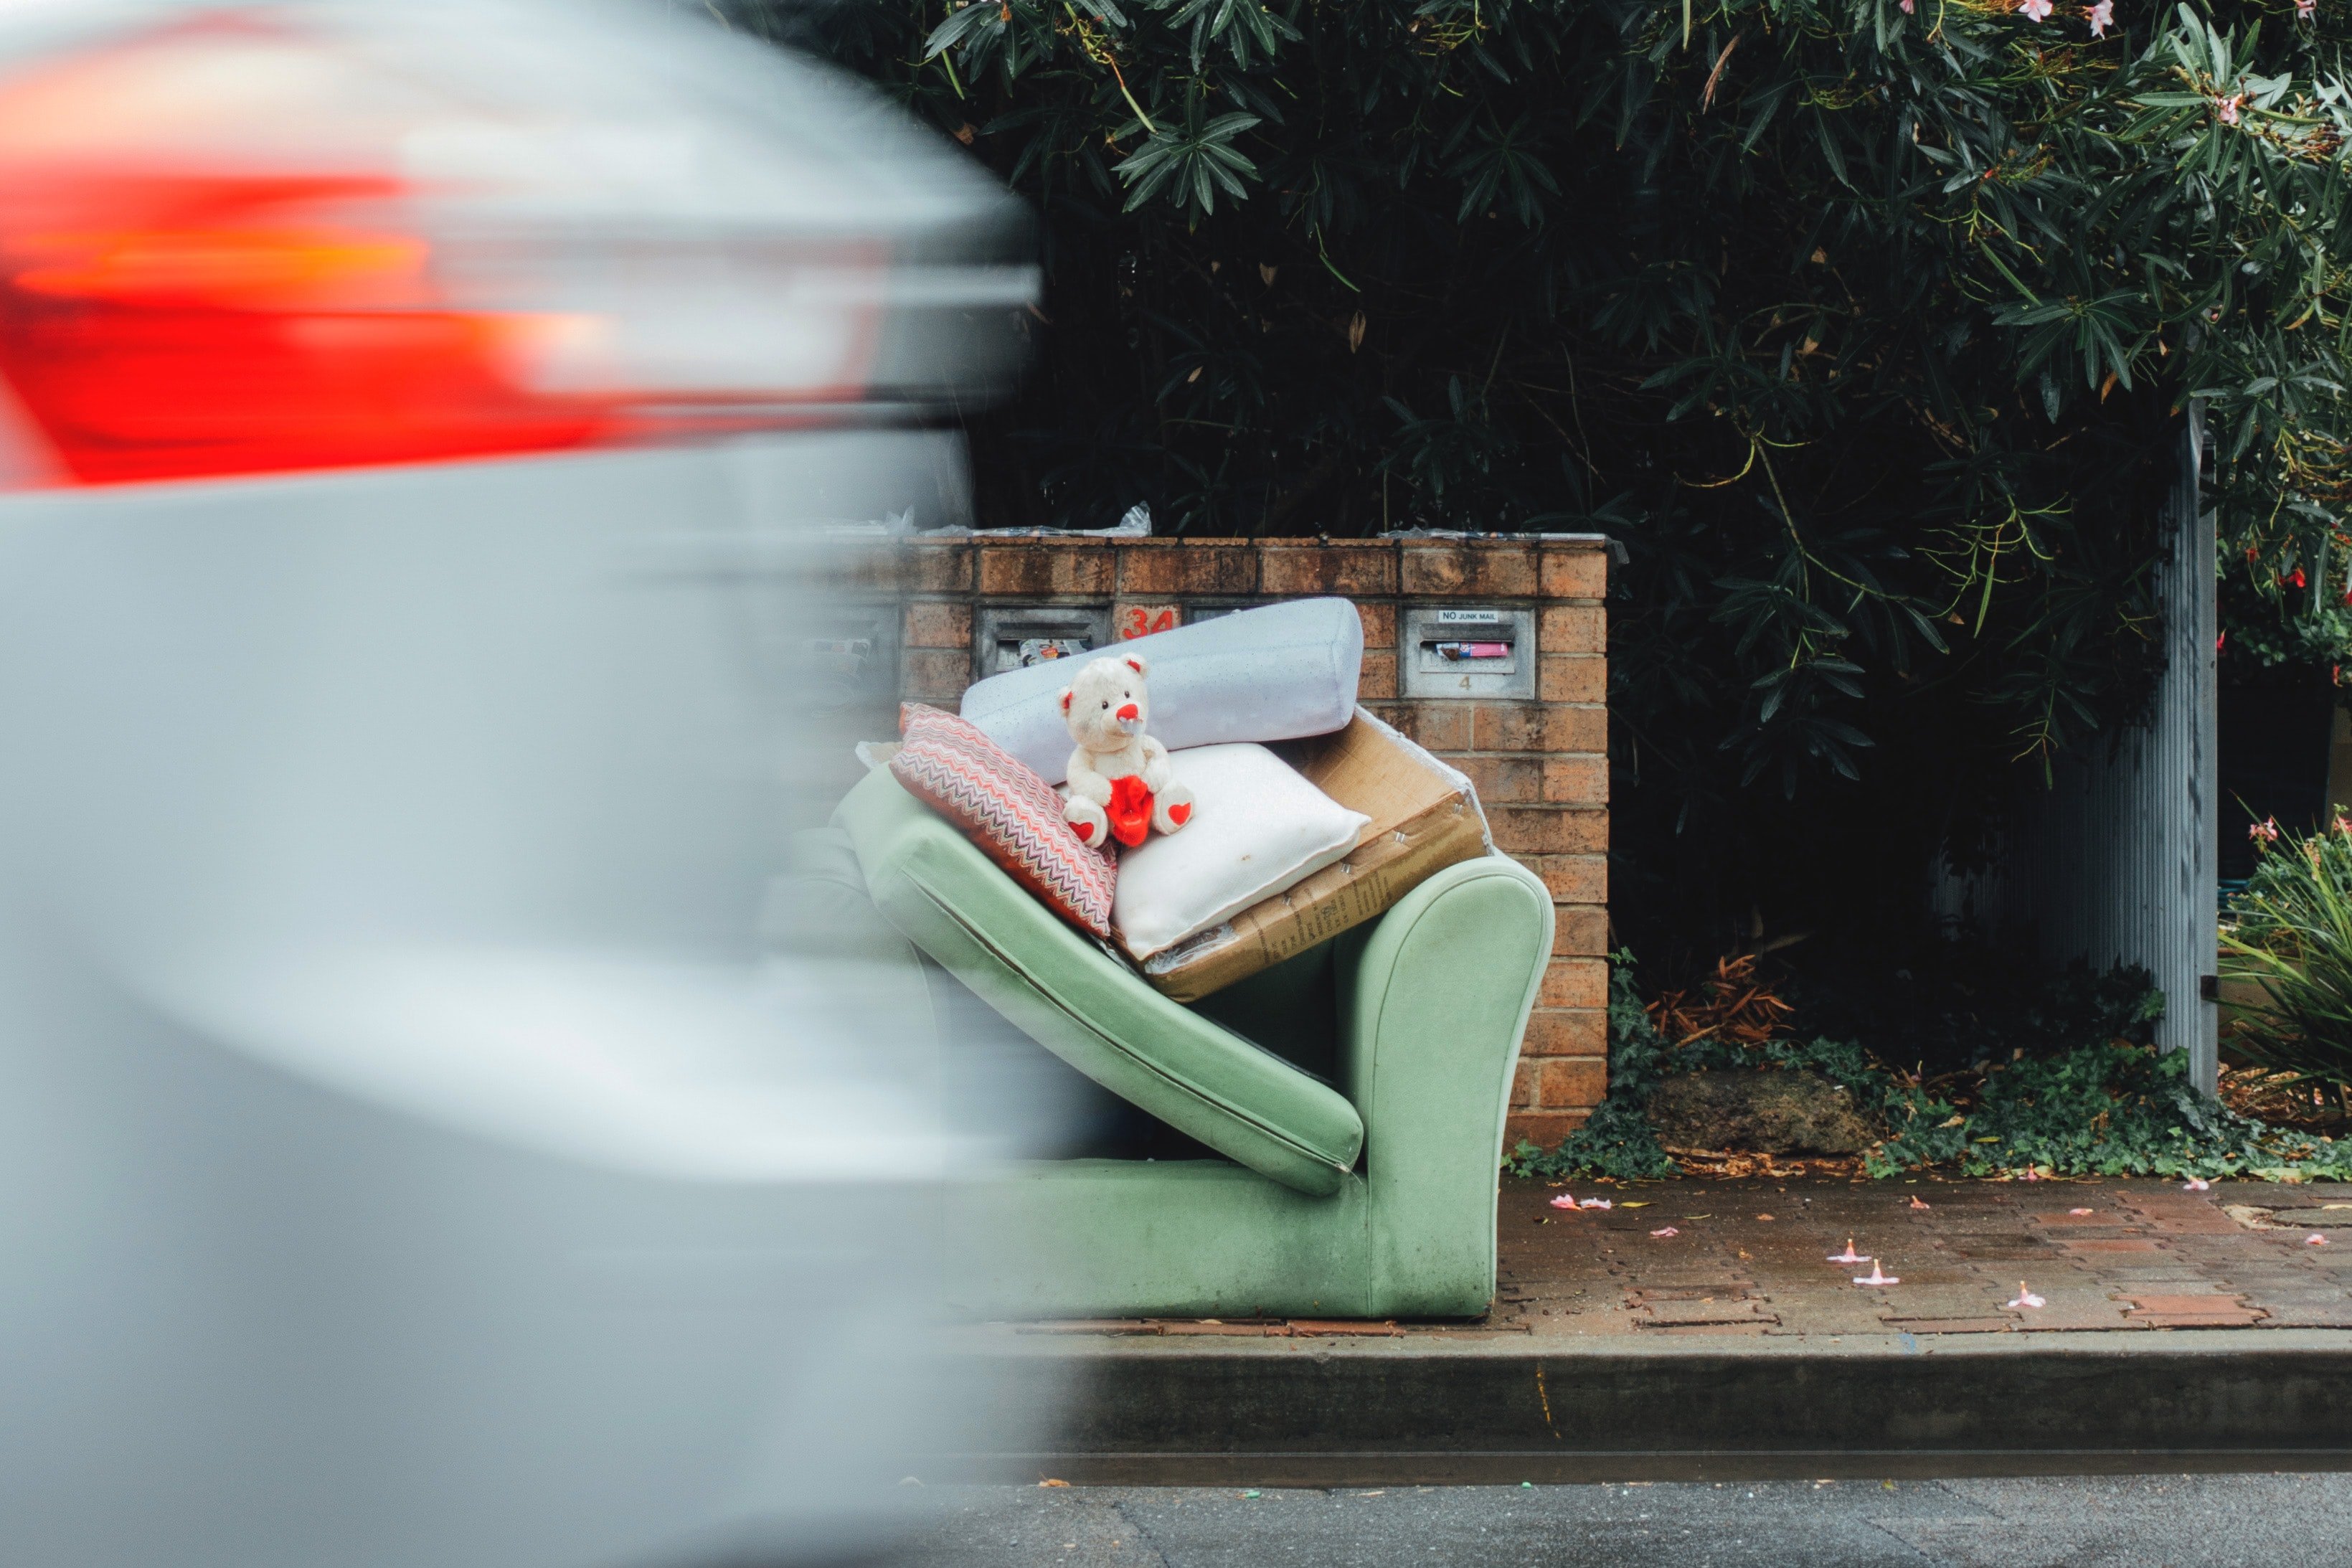 Betty brought Donald's favorite chair out in the street. | Source:Source: Unsplash